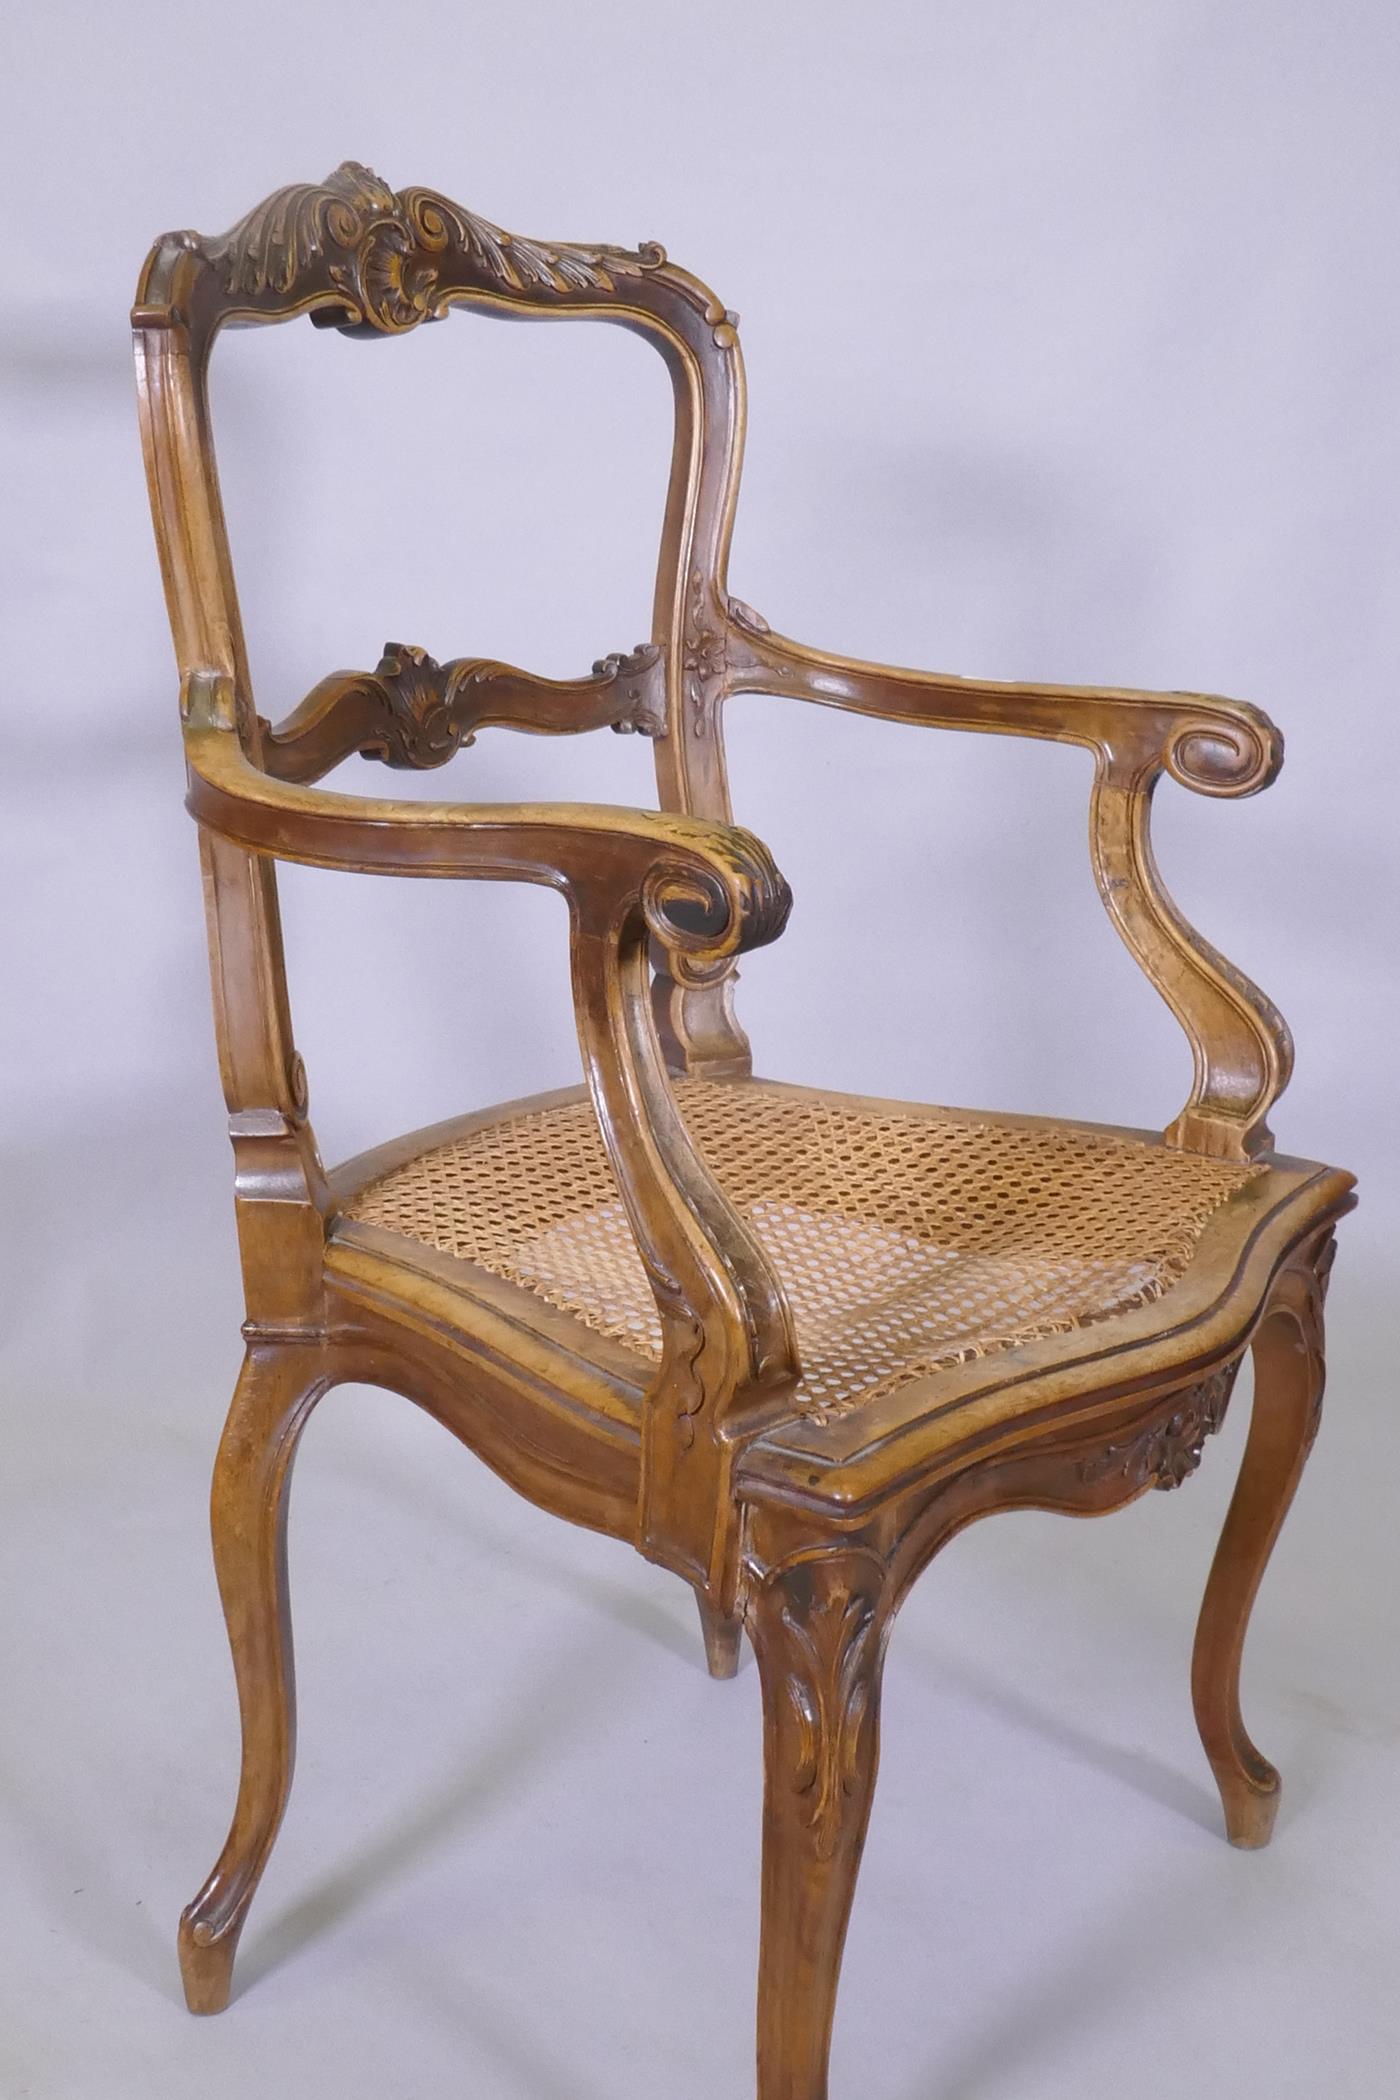 A C19th French carved walnut open arm chair with caned seat - Image 2 of 5